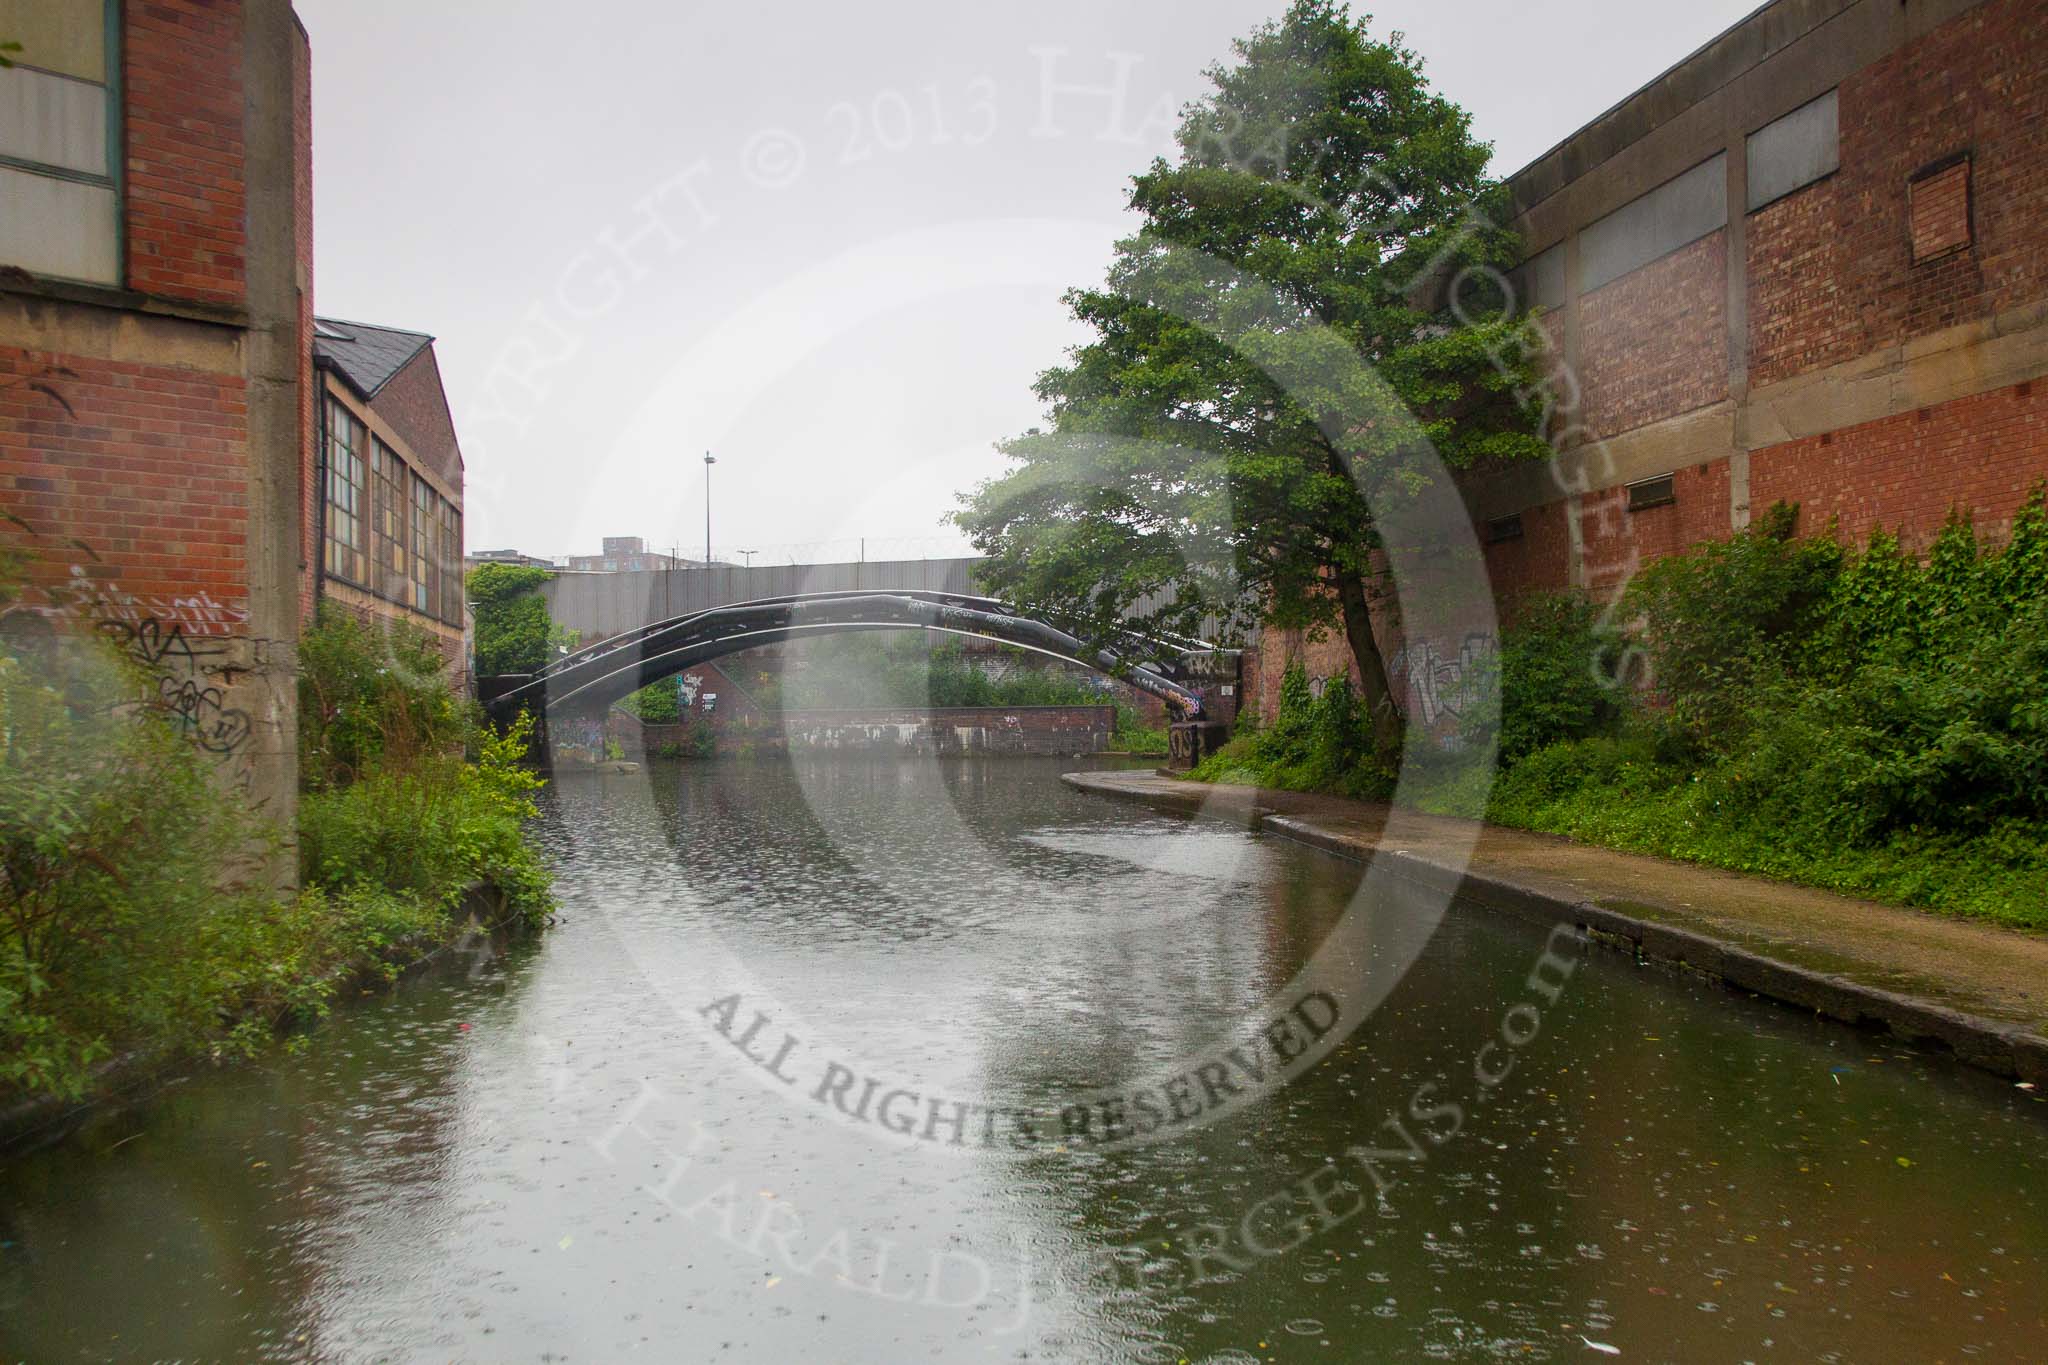 BCN Marathon Challenge 2014: Bordesley Junction, seen from the Grand Union Canal, with the Digbeth Branch ahead.
Birmingham Canal Navigation,


United Kingdom,
on 24 May 2014 at 09:24, image #86